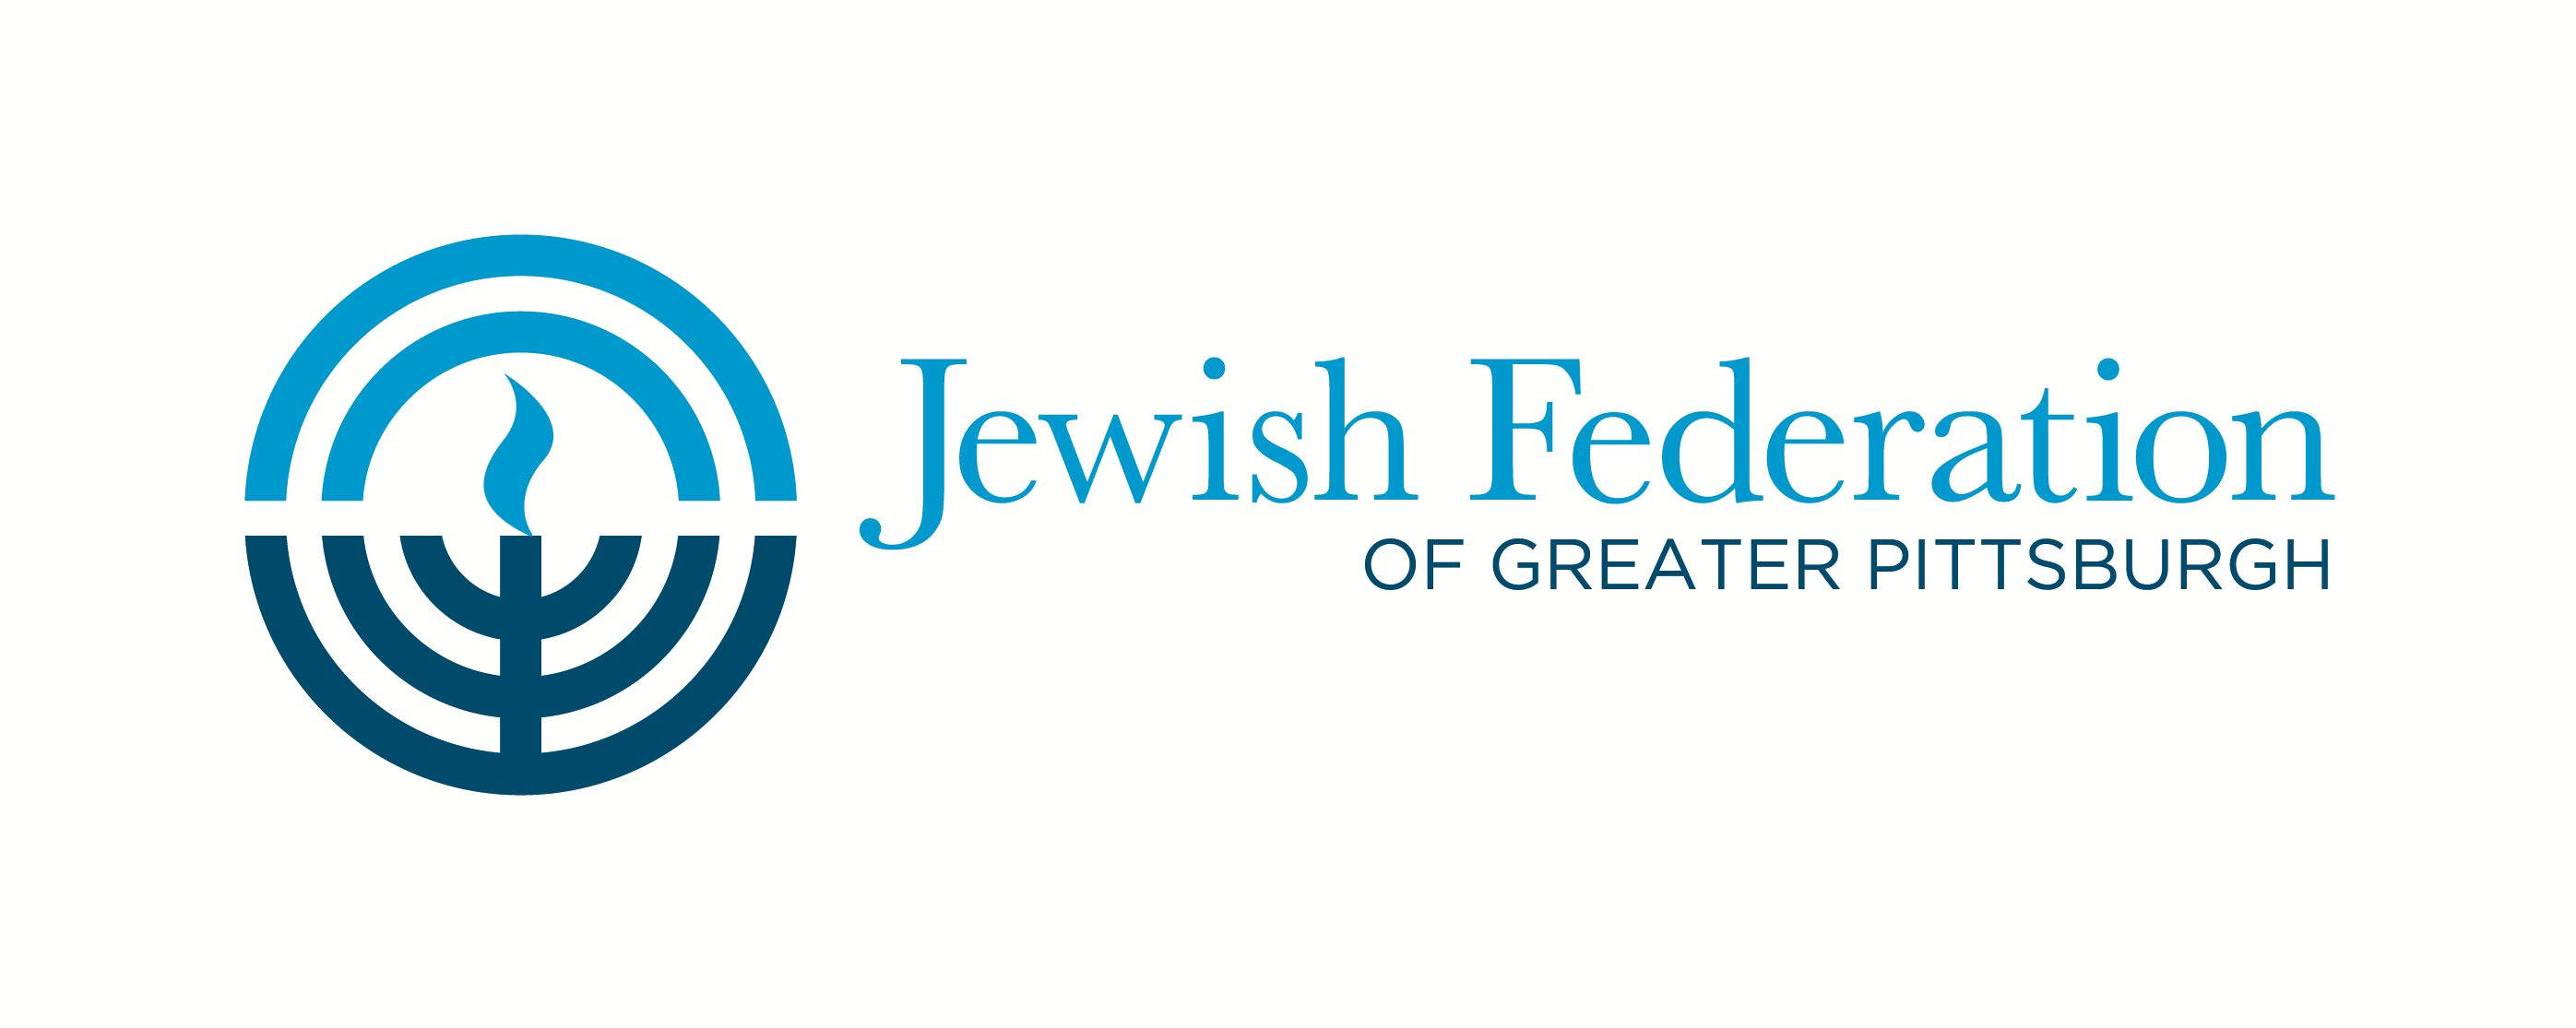 Jewish Federation of Greater Pittsburgh logo